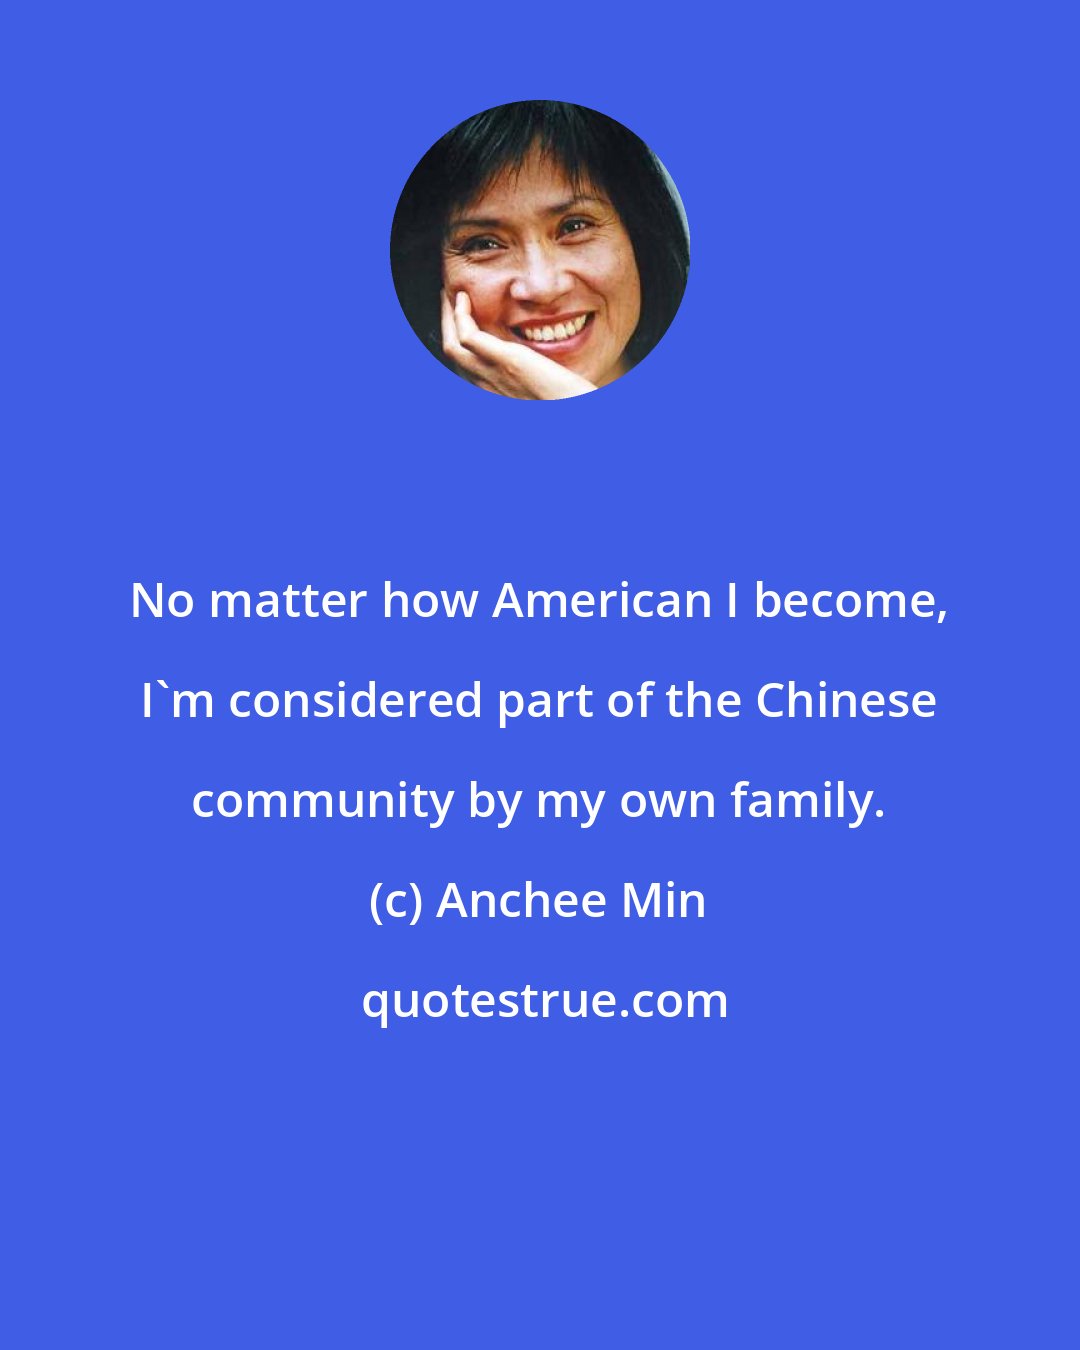 Anchee Min: No matter how American I become, I'm considered part of the Chinese community by my own family.